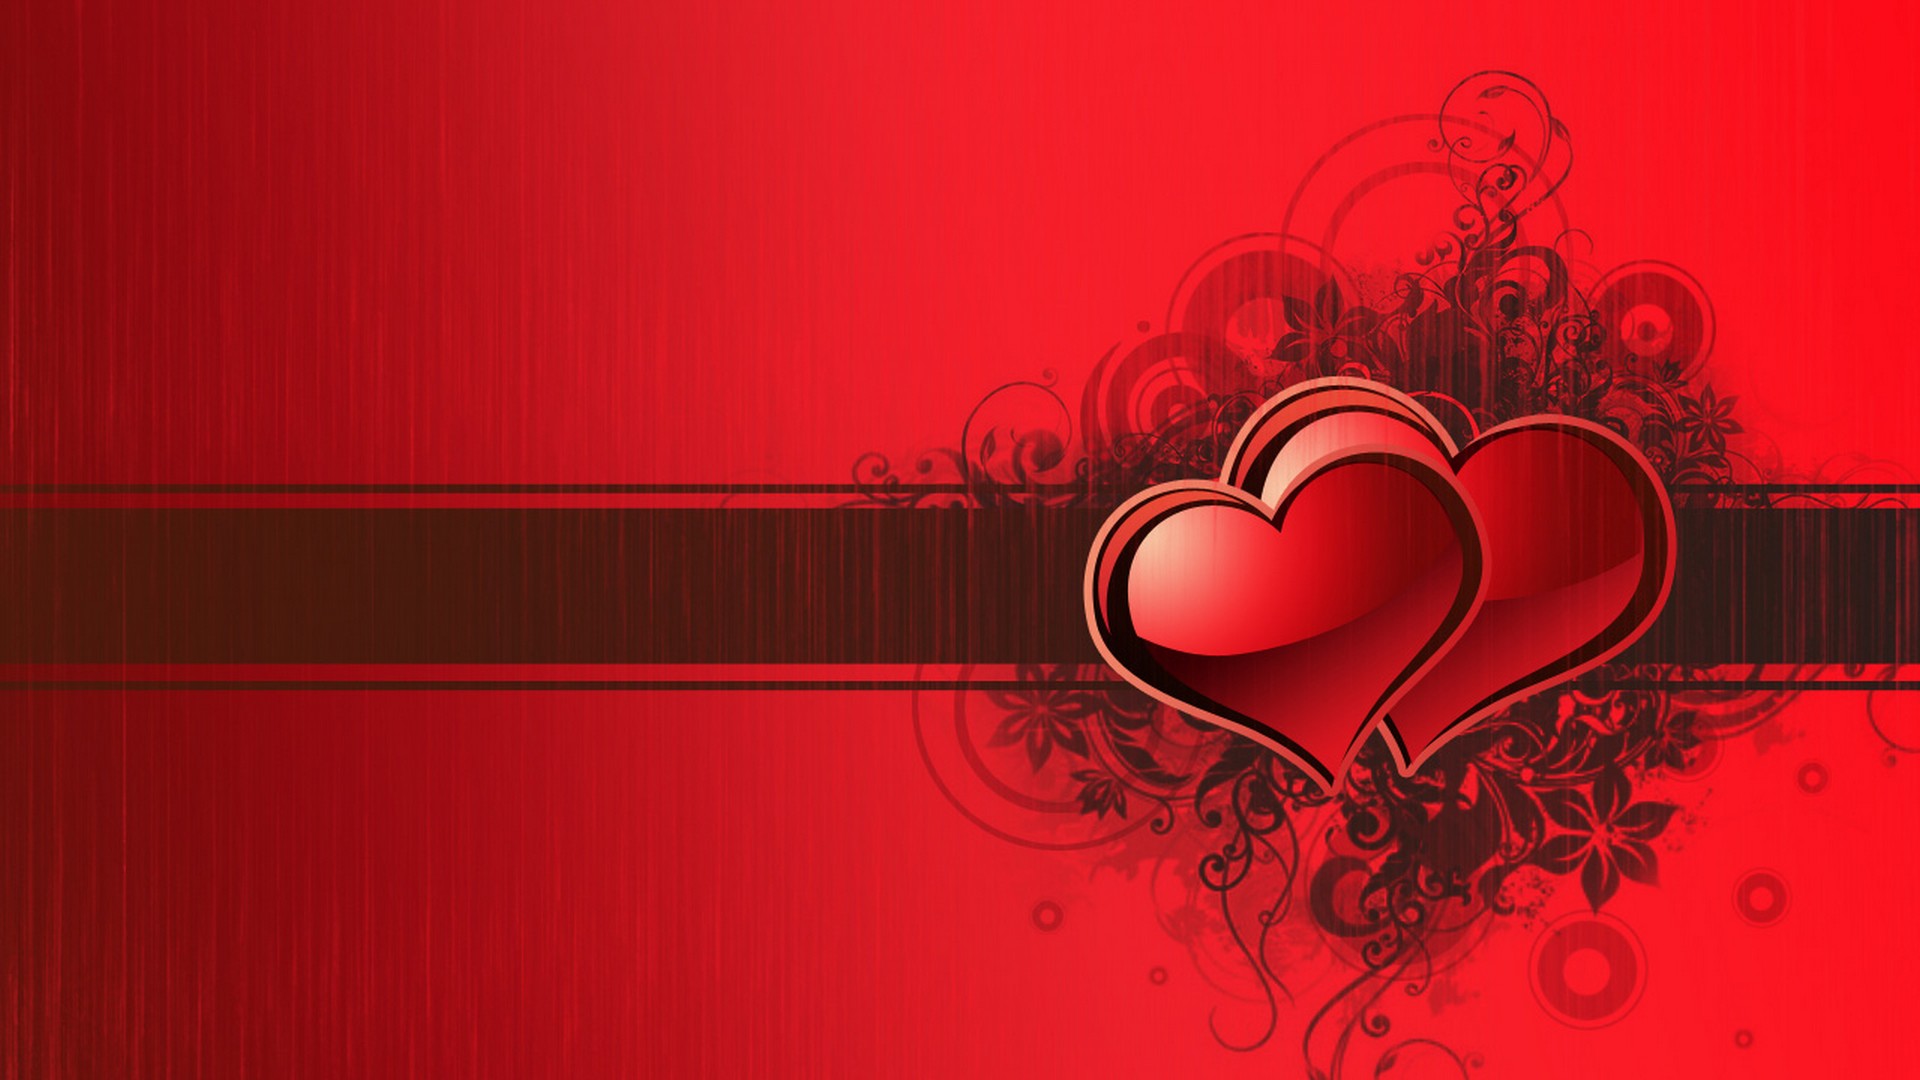 Romantic Images Of Valentines Day 1920x1080